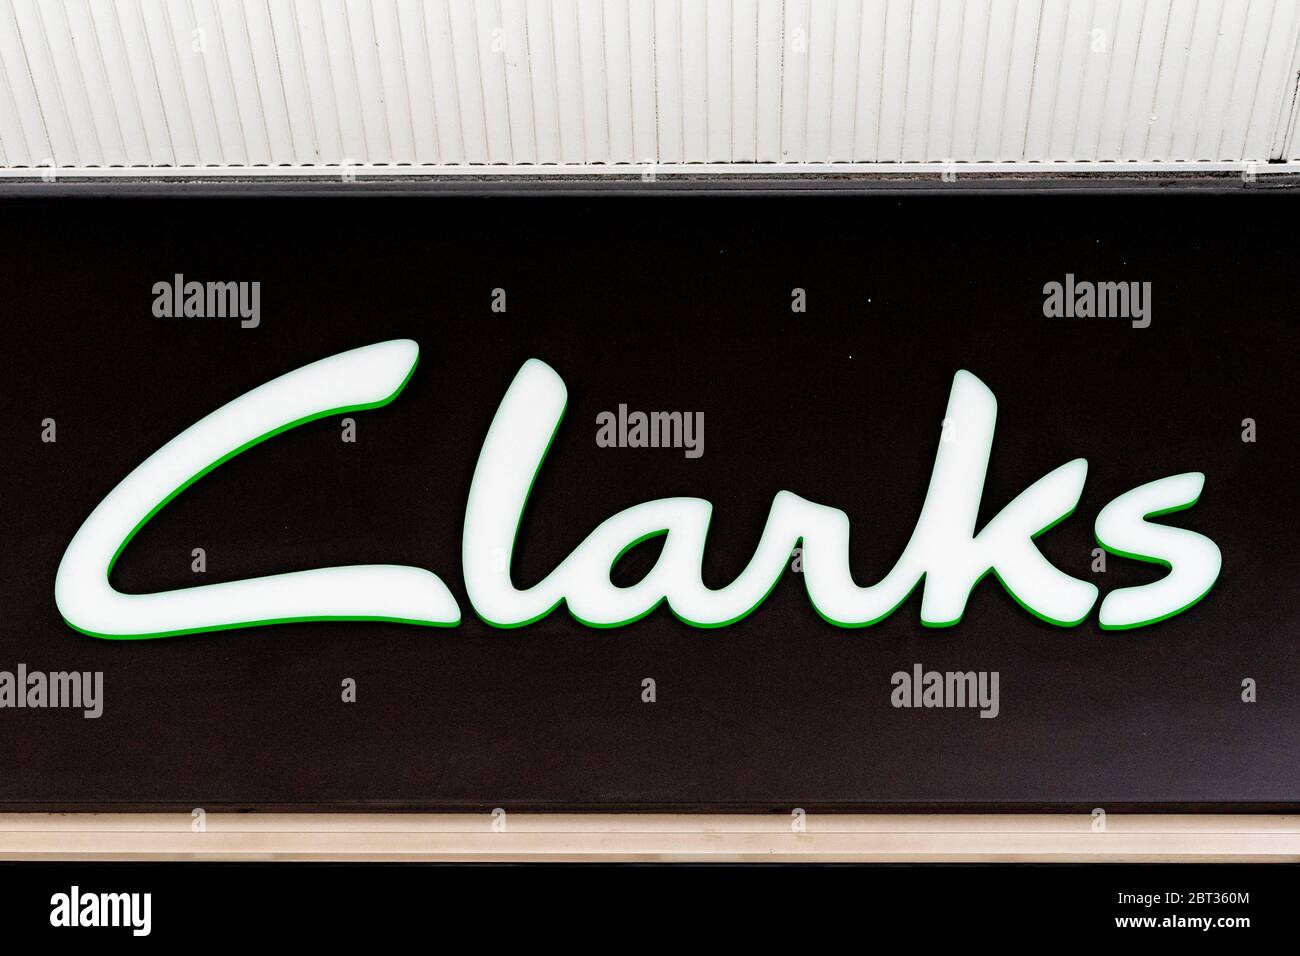 London, UK. 22nd May, 2020. Clarks logo on one of their branches at Oxford Street.British-based international shoe manufacturer and retailer C. & J. Clark international Ltd, trading clarks is to